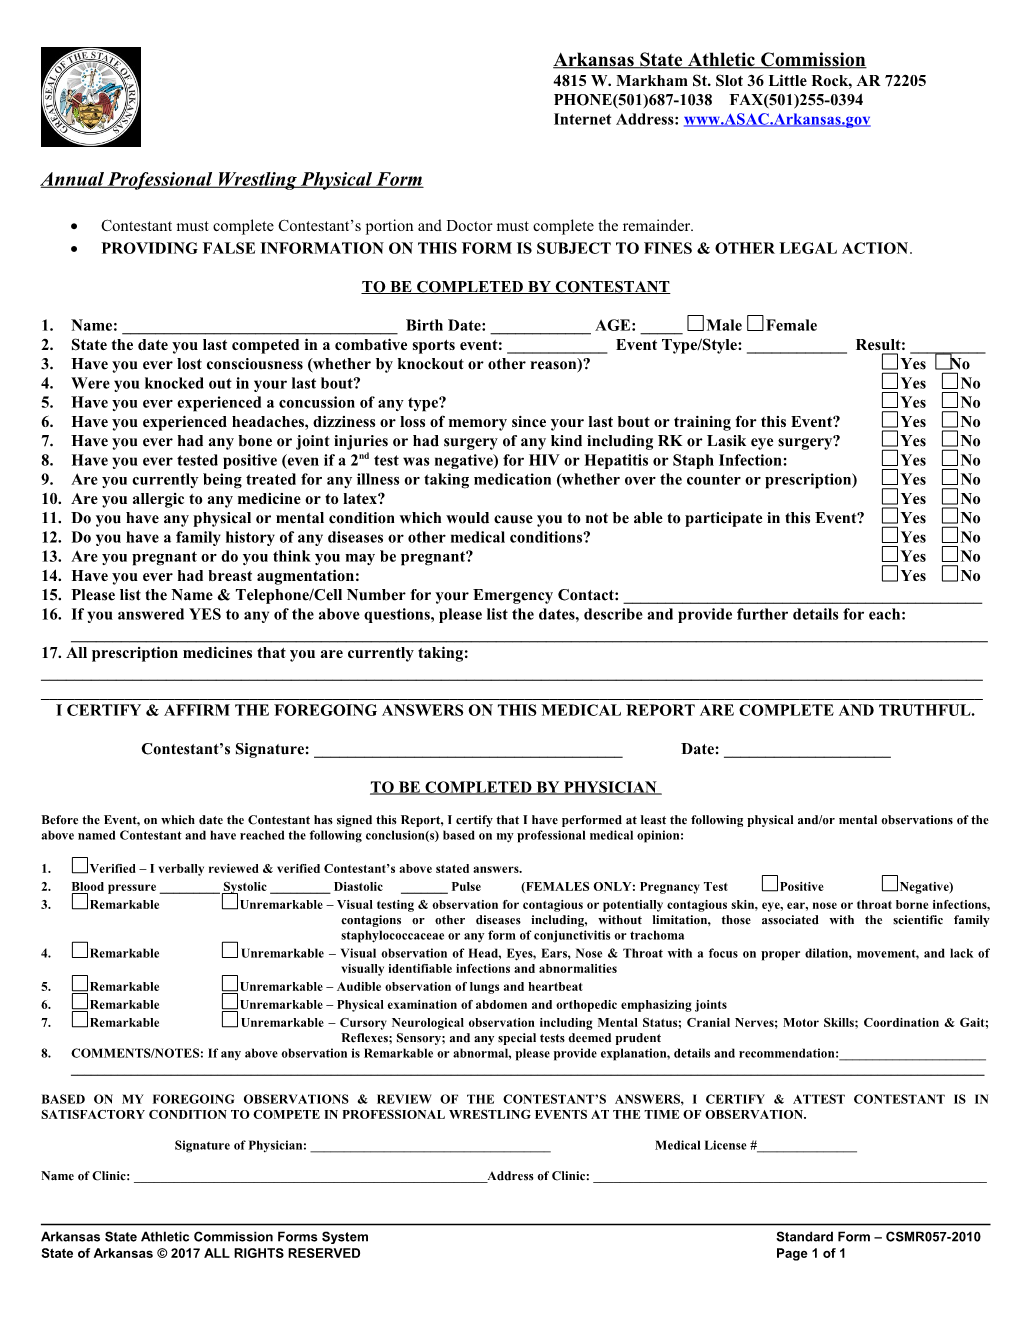 Arkansas State Athletic Commission Forms Systemstandard Form CSMR057-2010